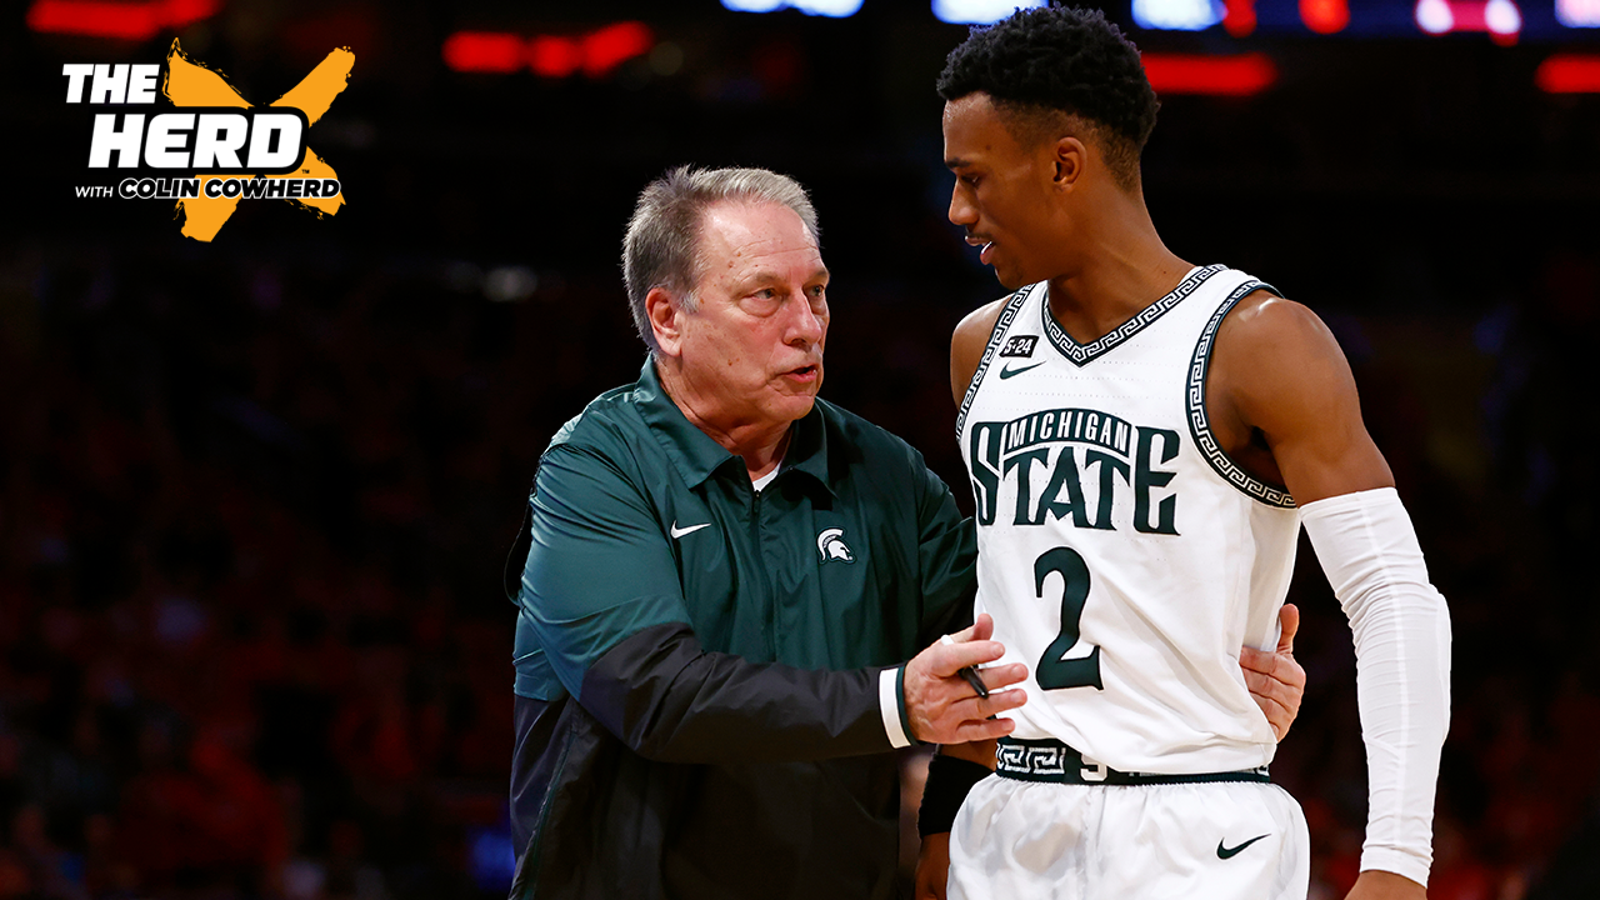 Tom Izzo explains the impacts of analytics and the transfer portal on college athletics 